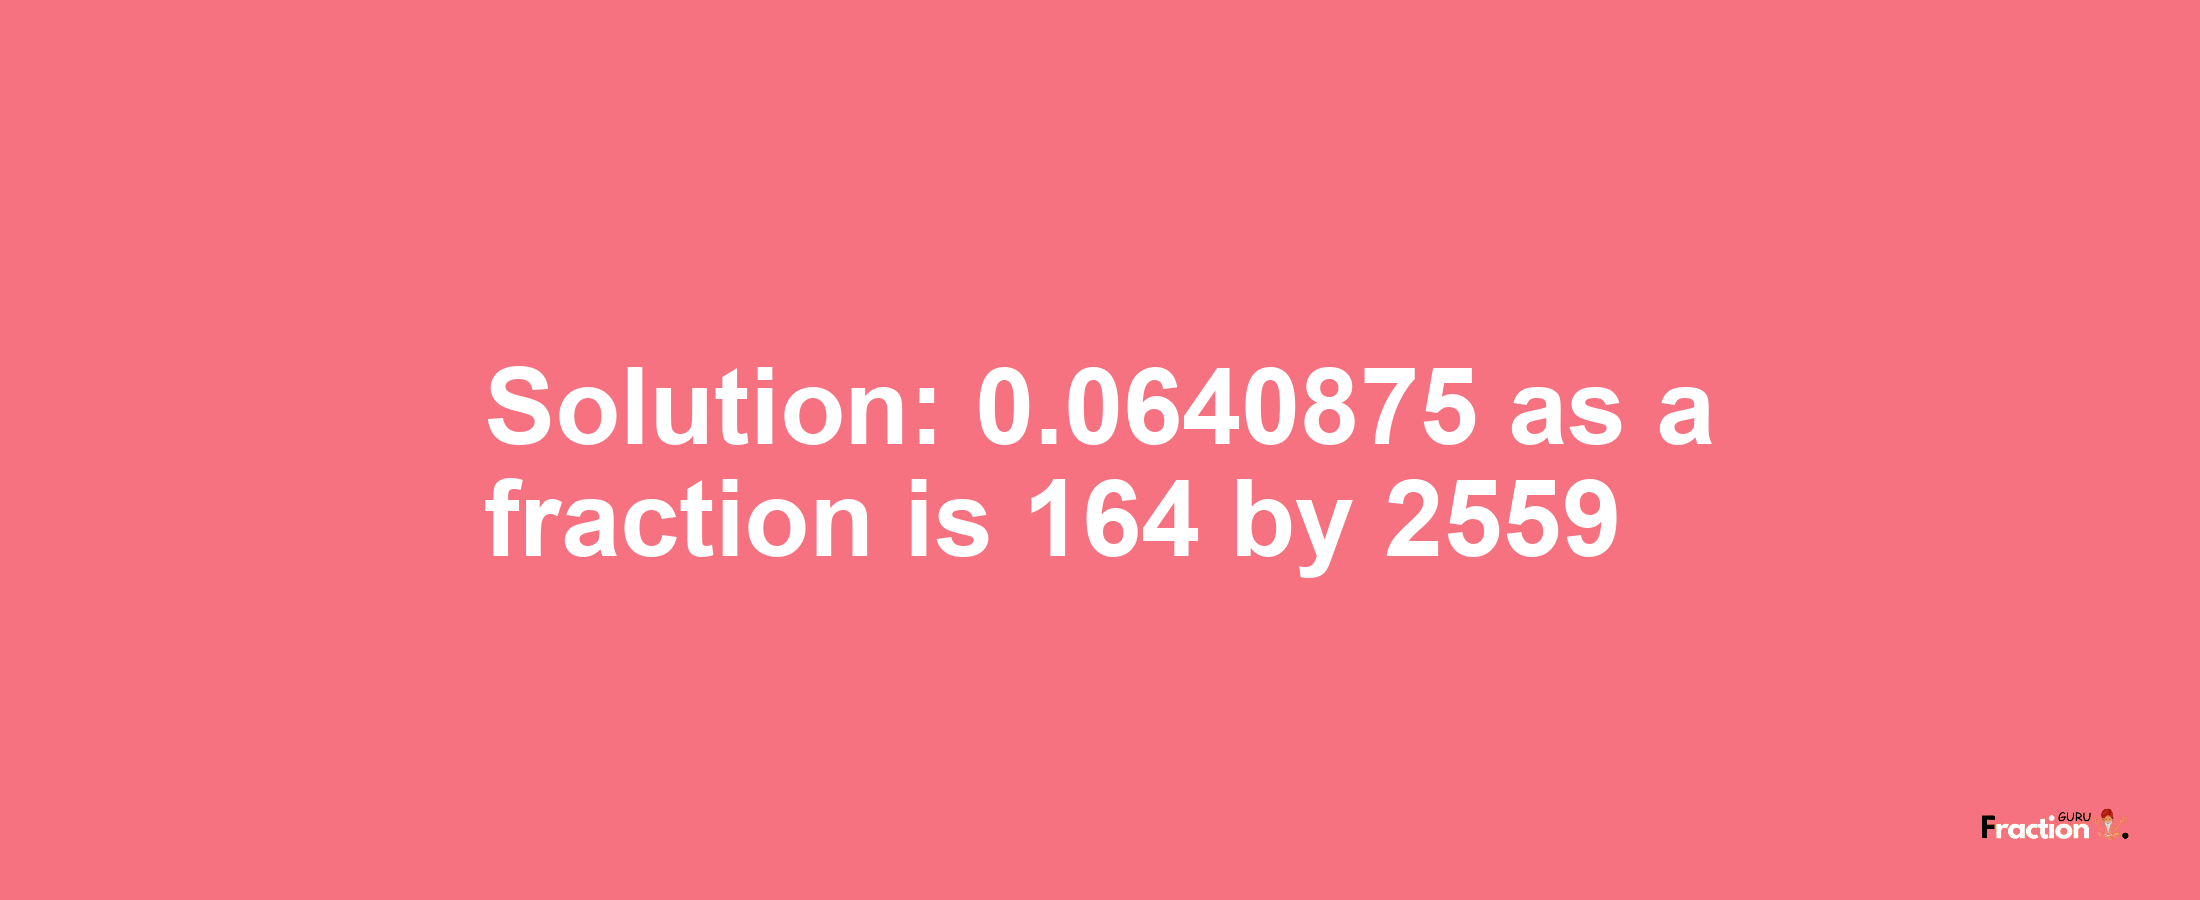 Solution:0.0640875 as a fraction is 164/2559